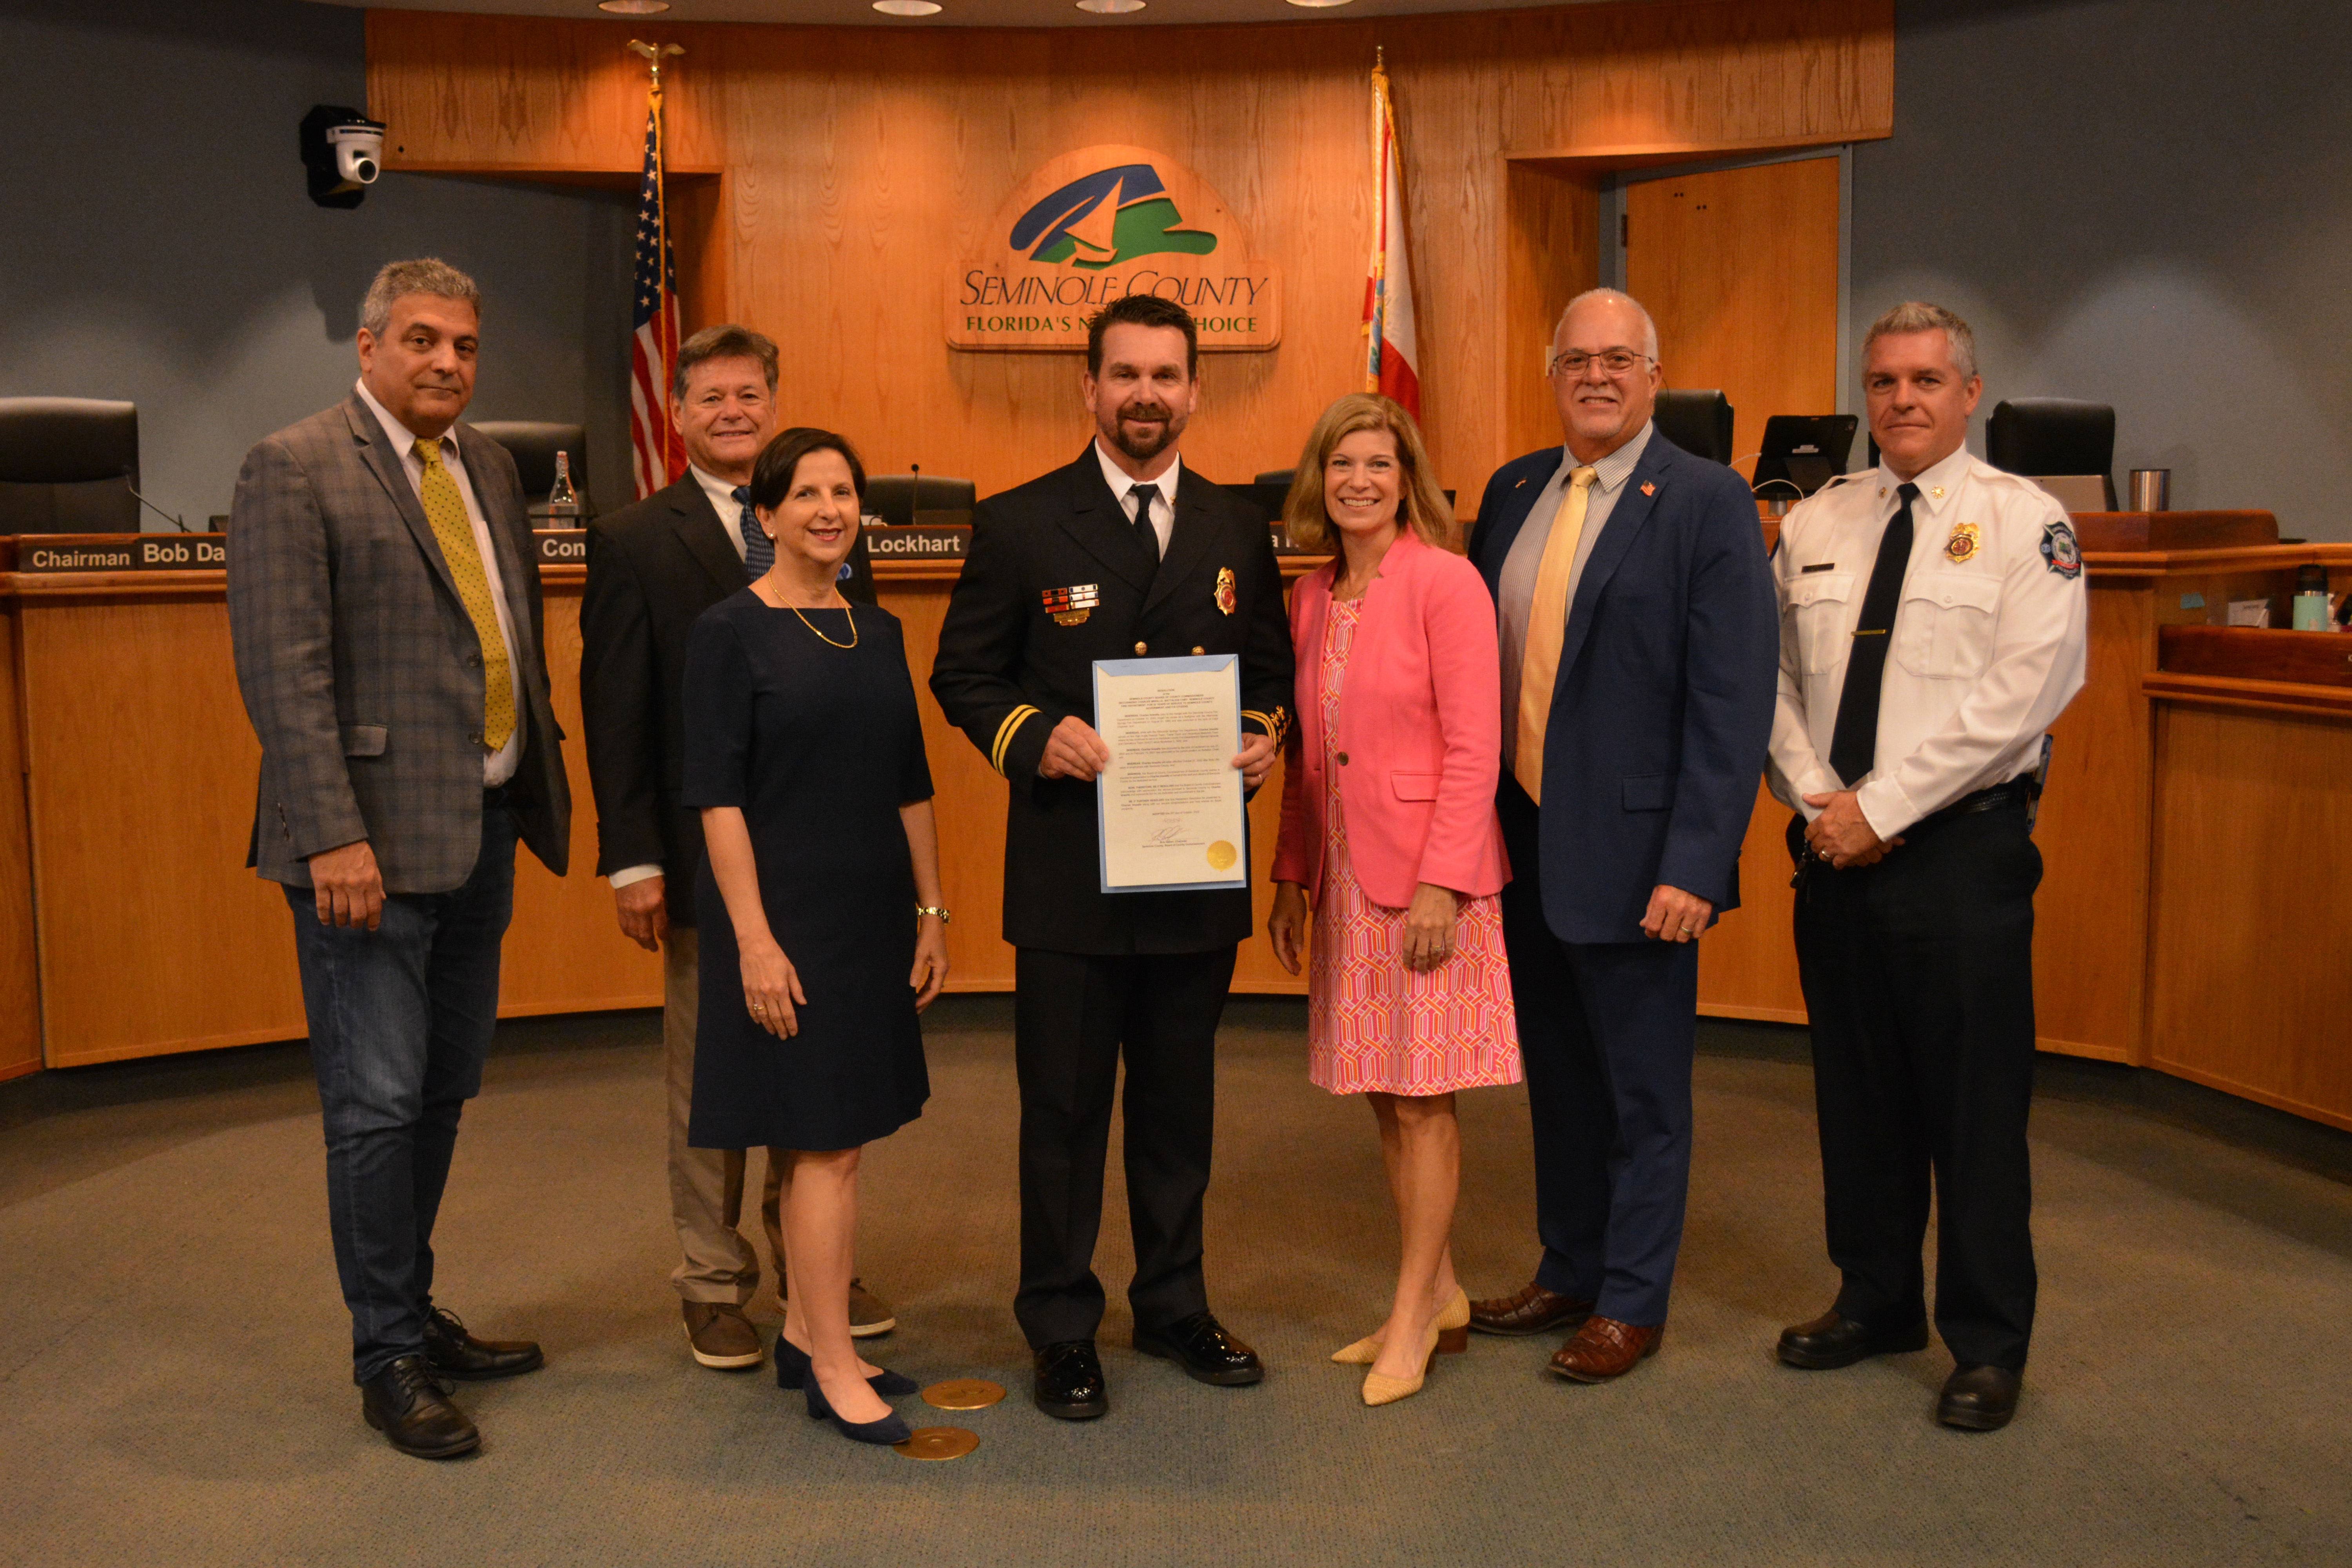  Resolution - Recognizing Charles Imwalle upon his retirement for 30 years of service to Seminole County Government and its citizens.  (Charles Imwalle, Seminole County Fire Department)